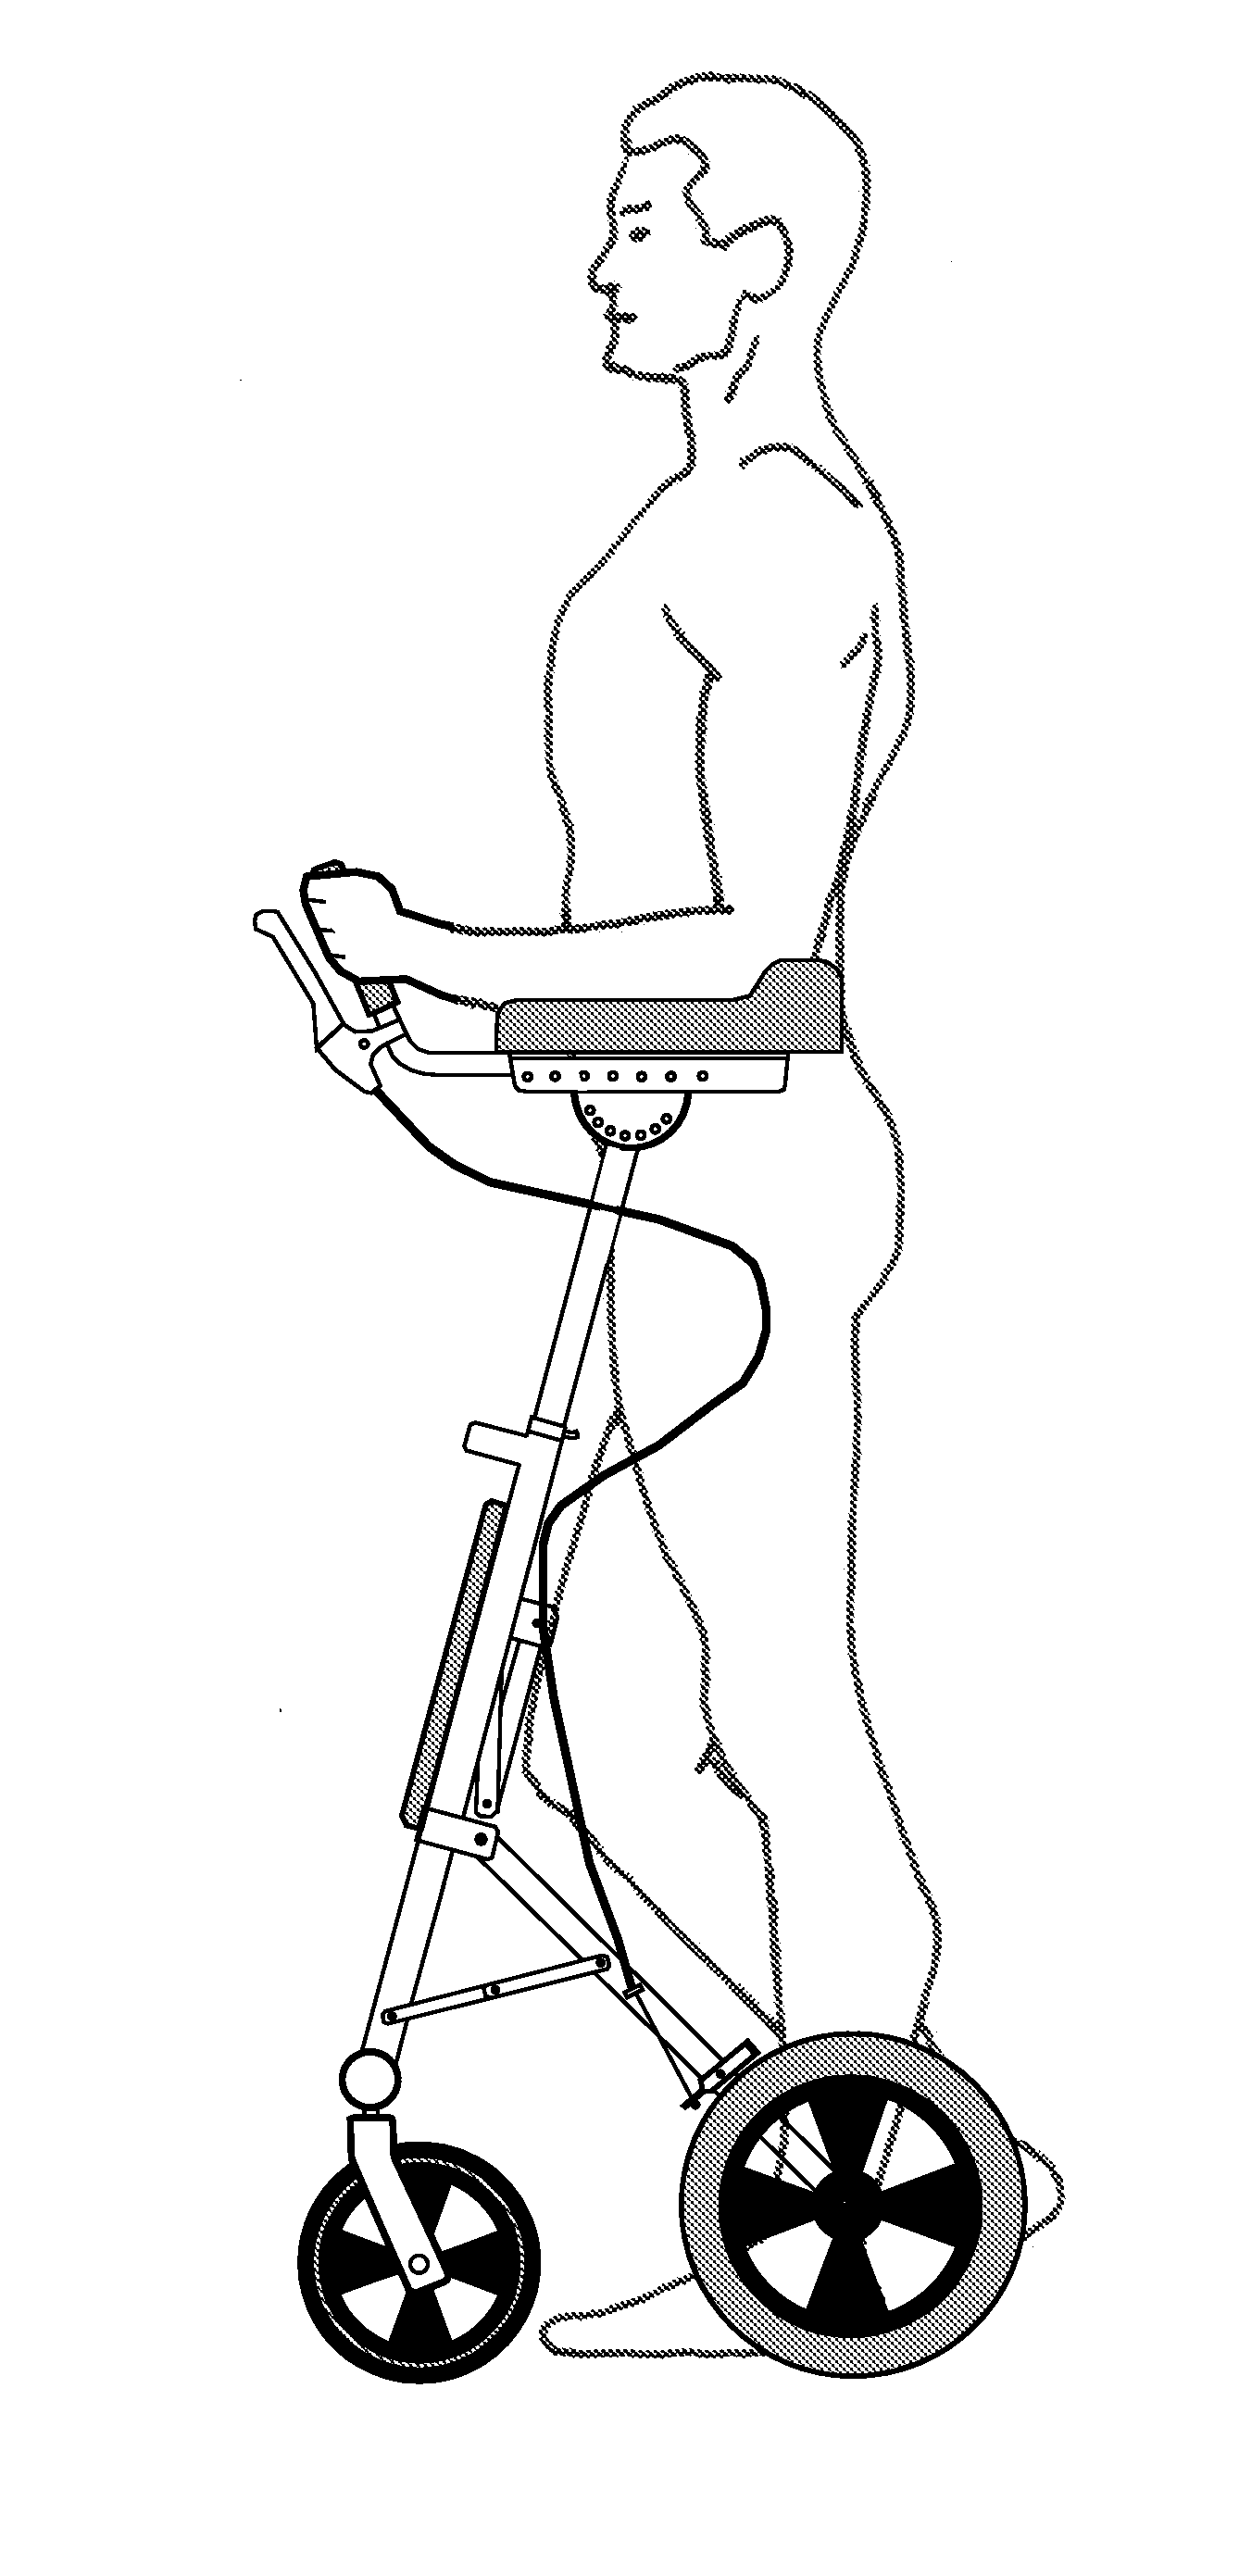 Erect posture mobility device with low turn radius